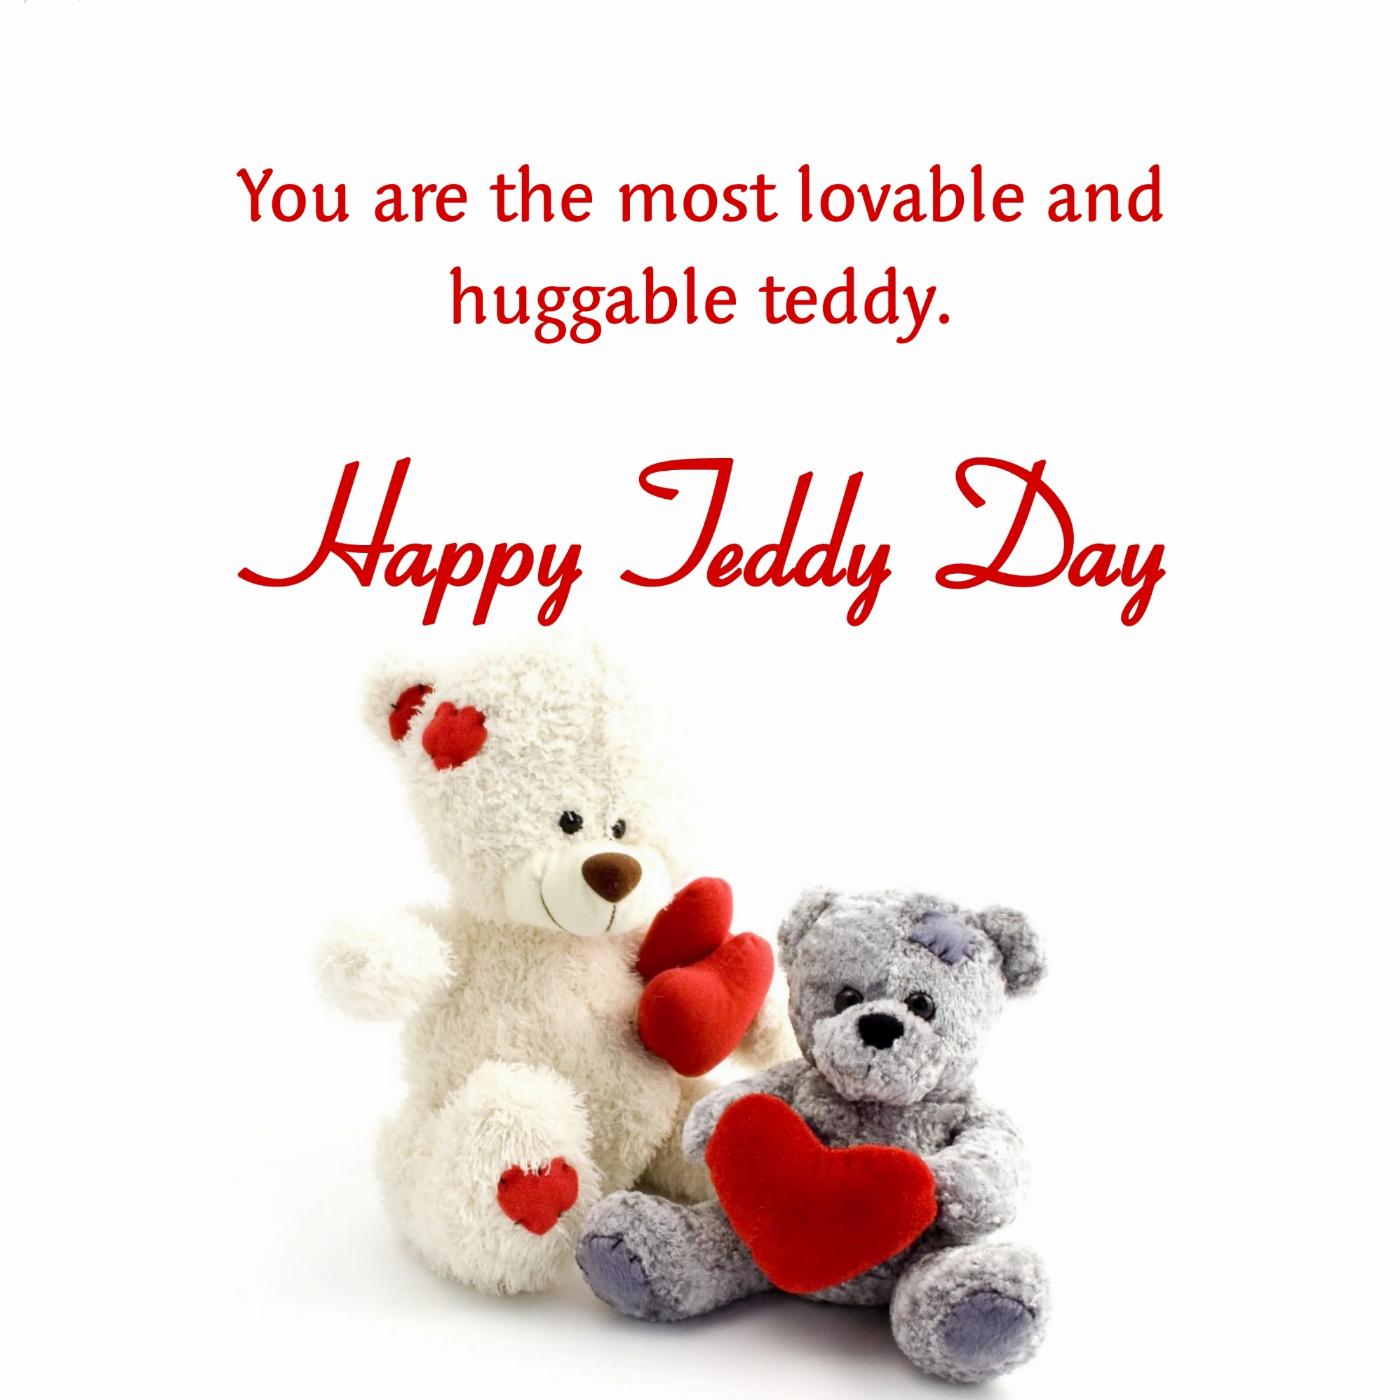 You are the most lovable and huggable teddy